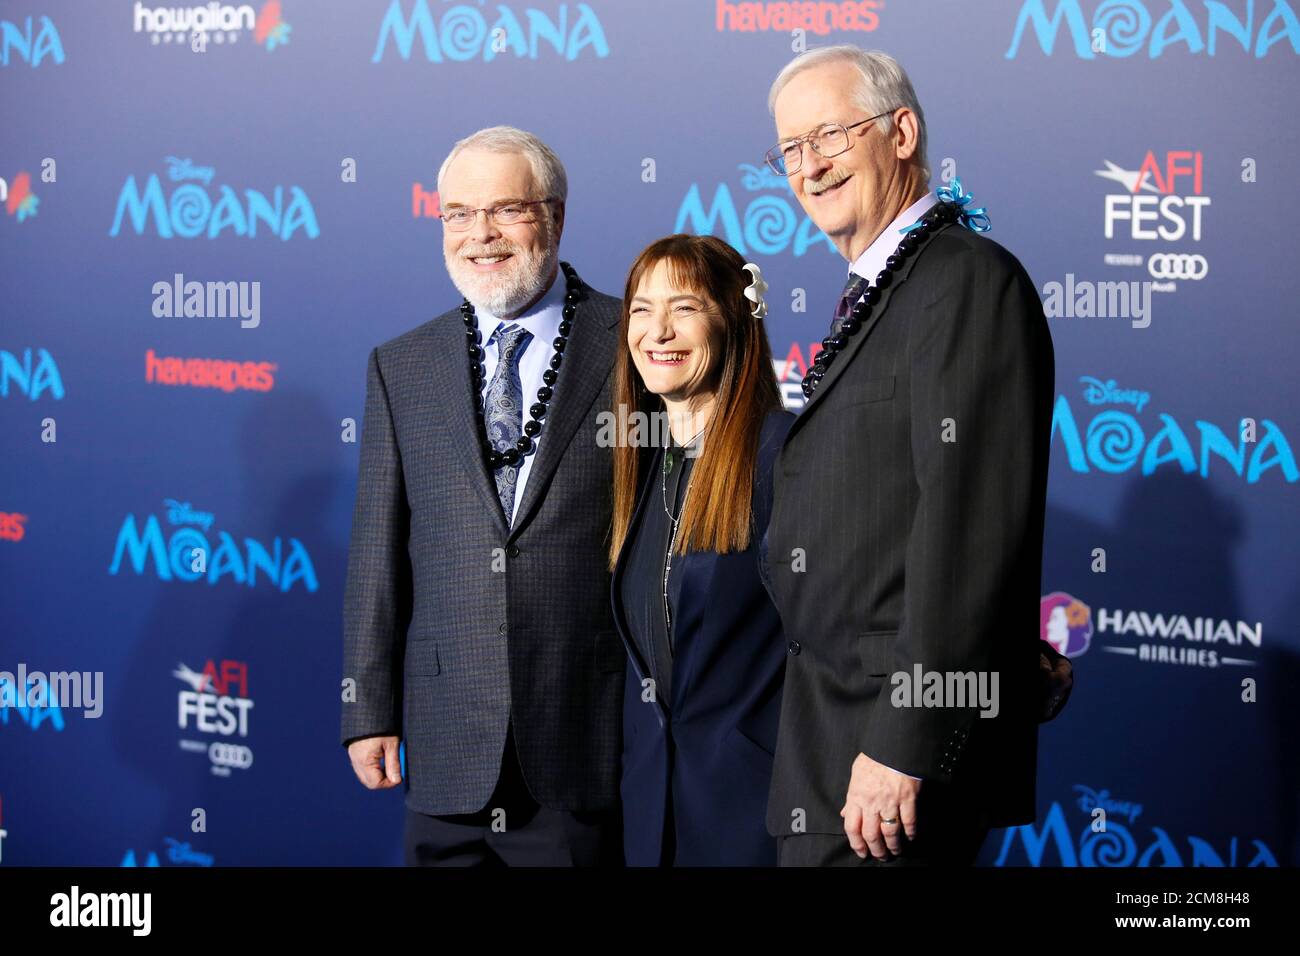 Directors Ron Clements (L) and John Musker (R) pose with producer Osnat Shurer (C) at the world premiere of Walt Disney Animation Studios' 'Moana' as a part of AFI Fest in Hollywood, California, U.S., November 14, 2016. REUTERS/Danny Moloshok Stock Photo